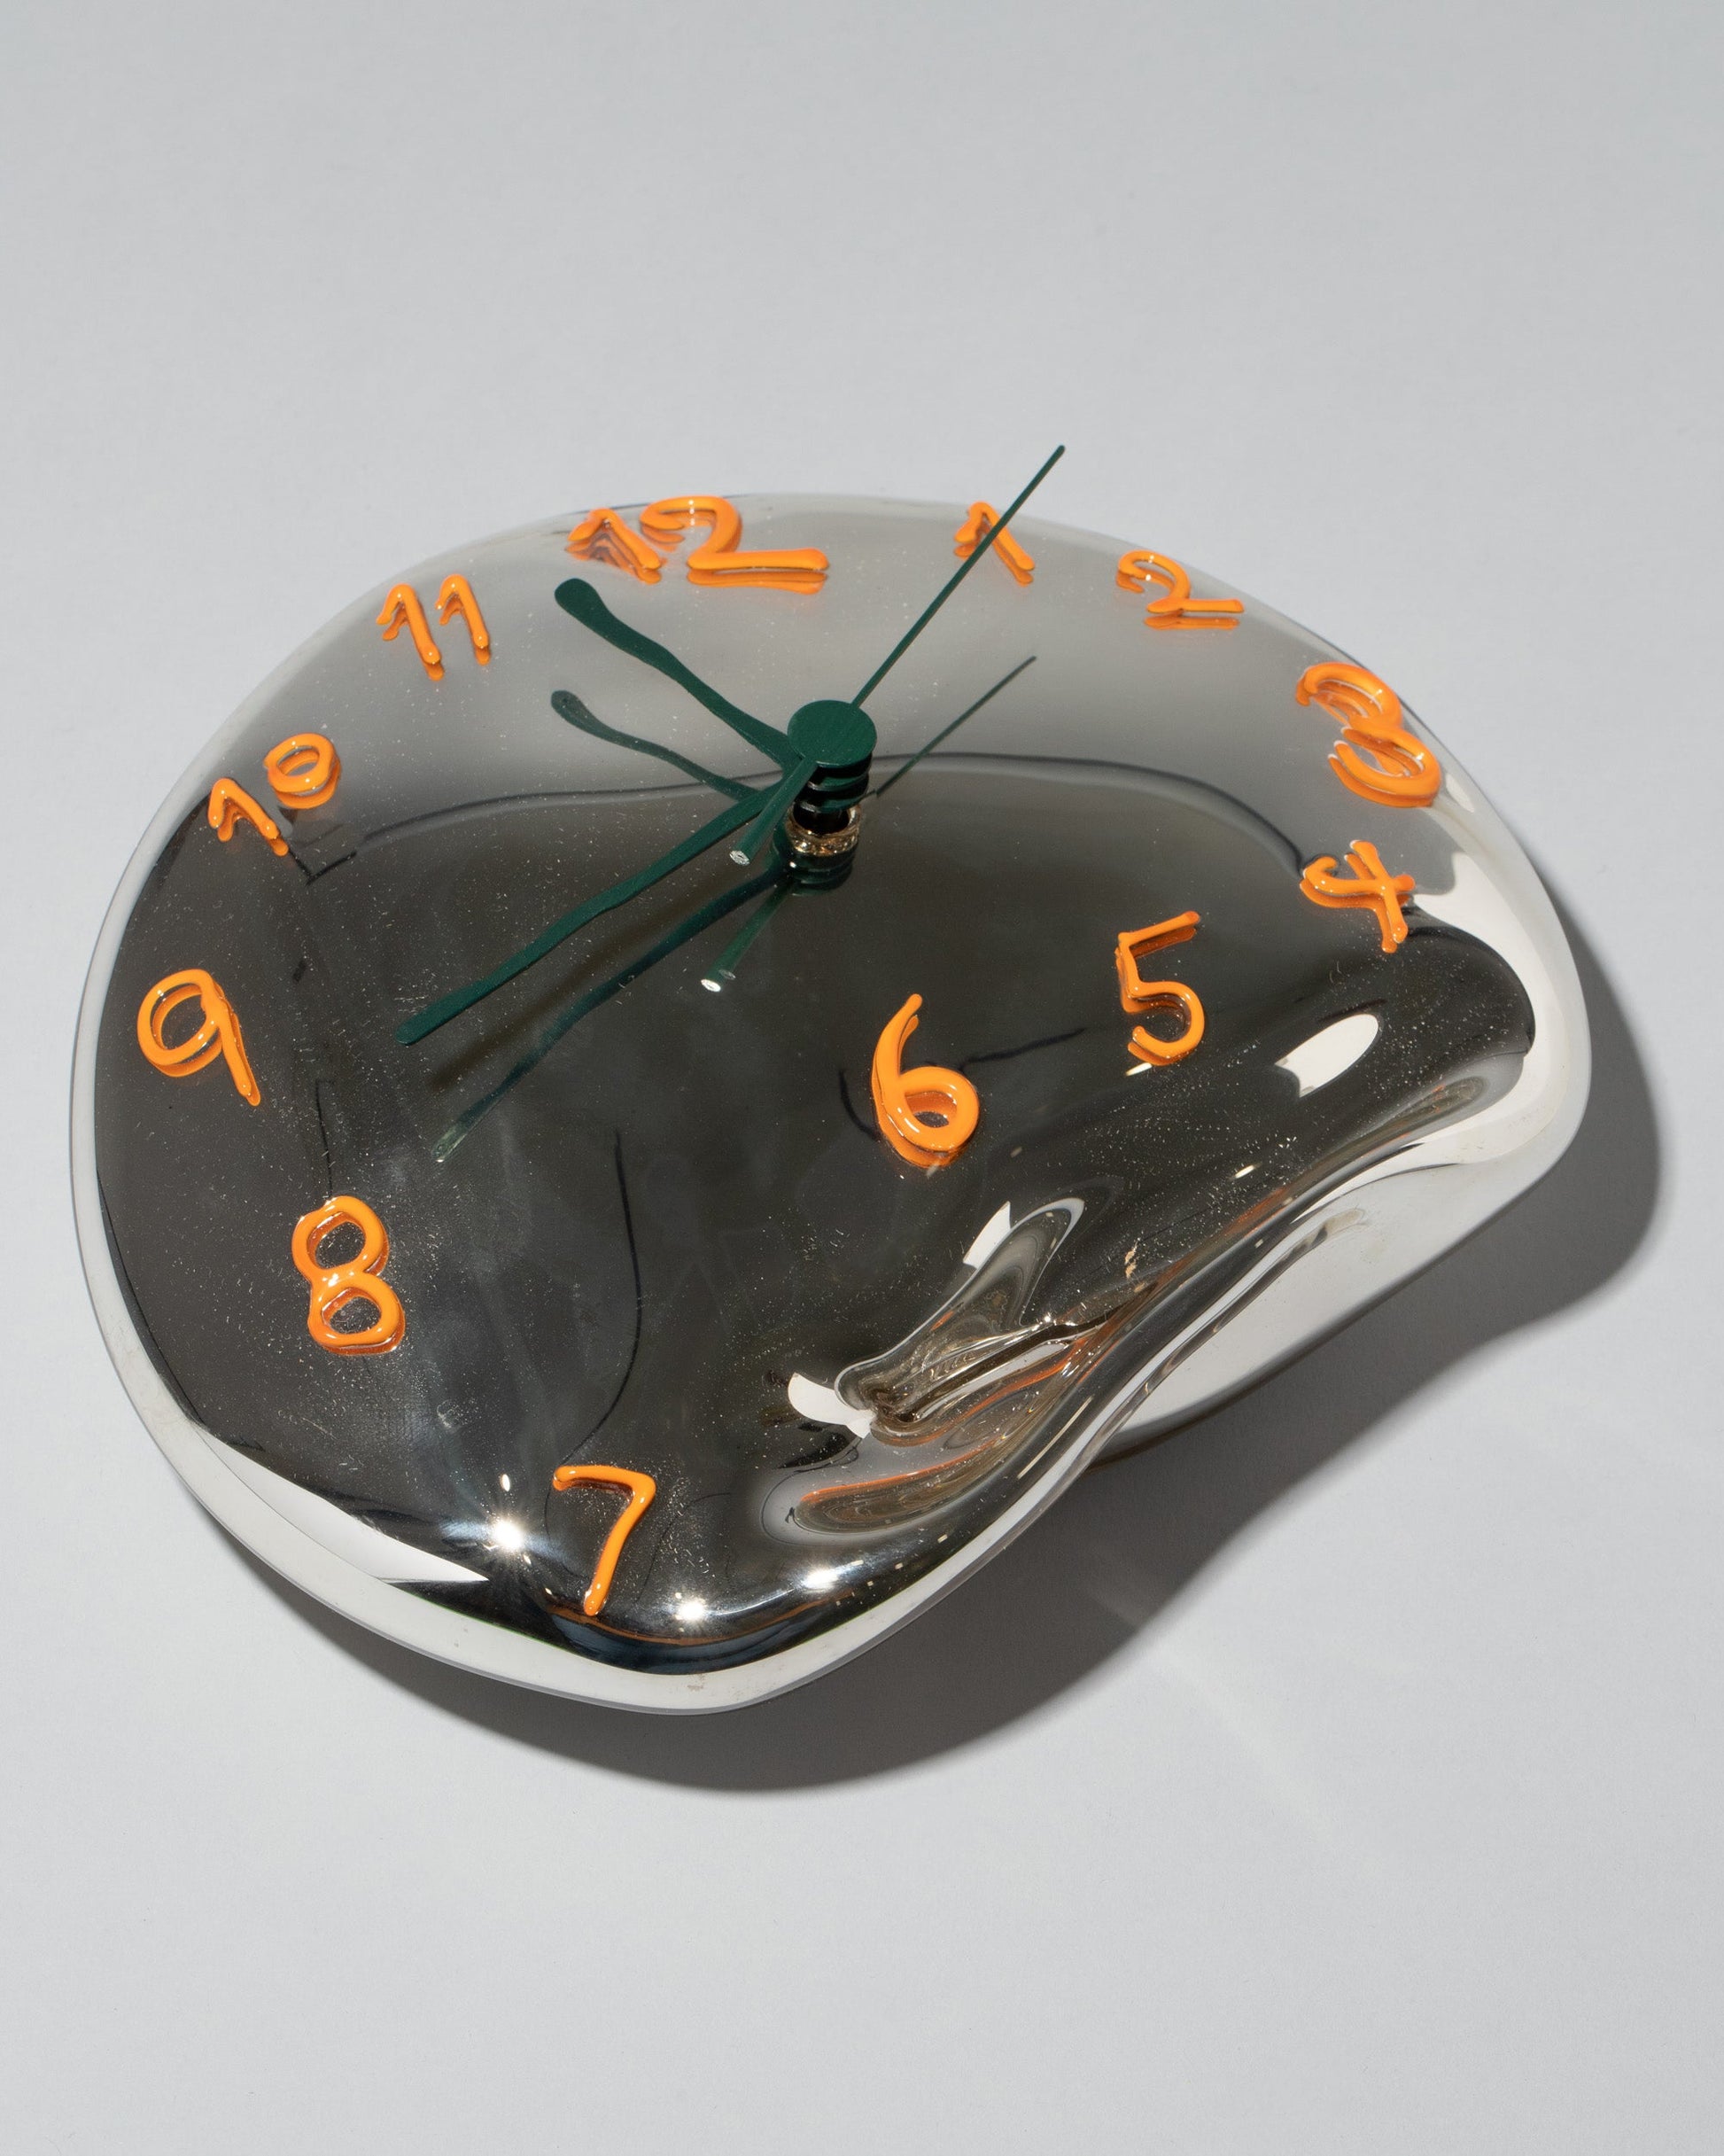 Orange Two Glass Wall Clock on light color background.